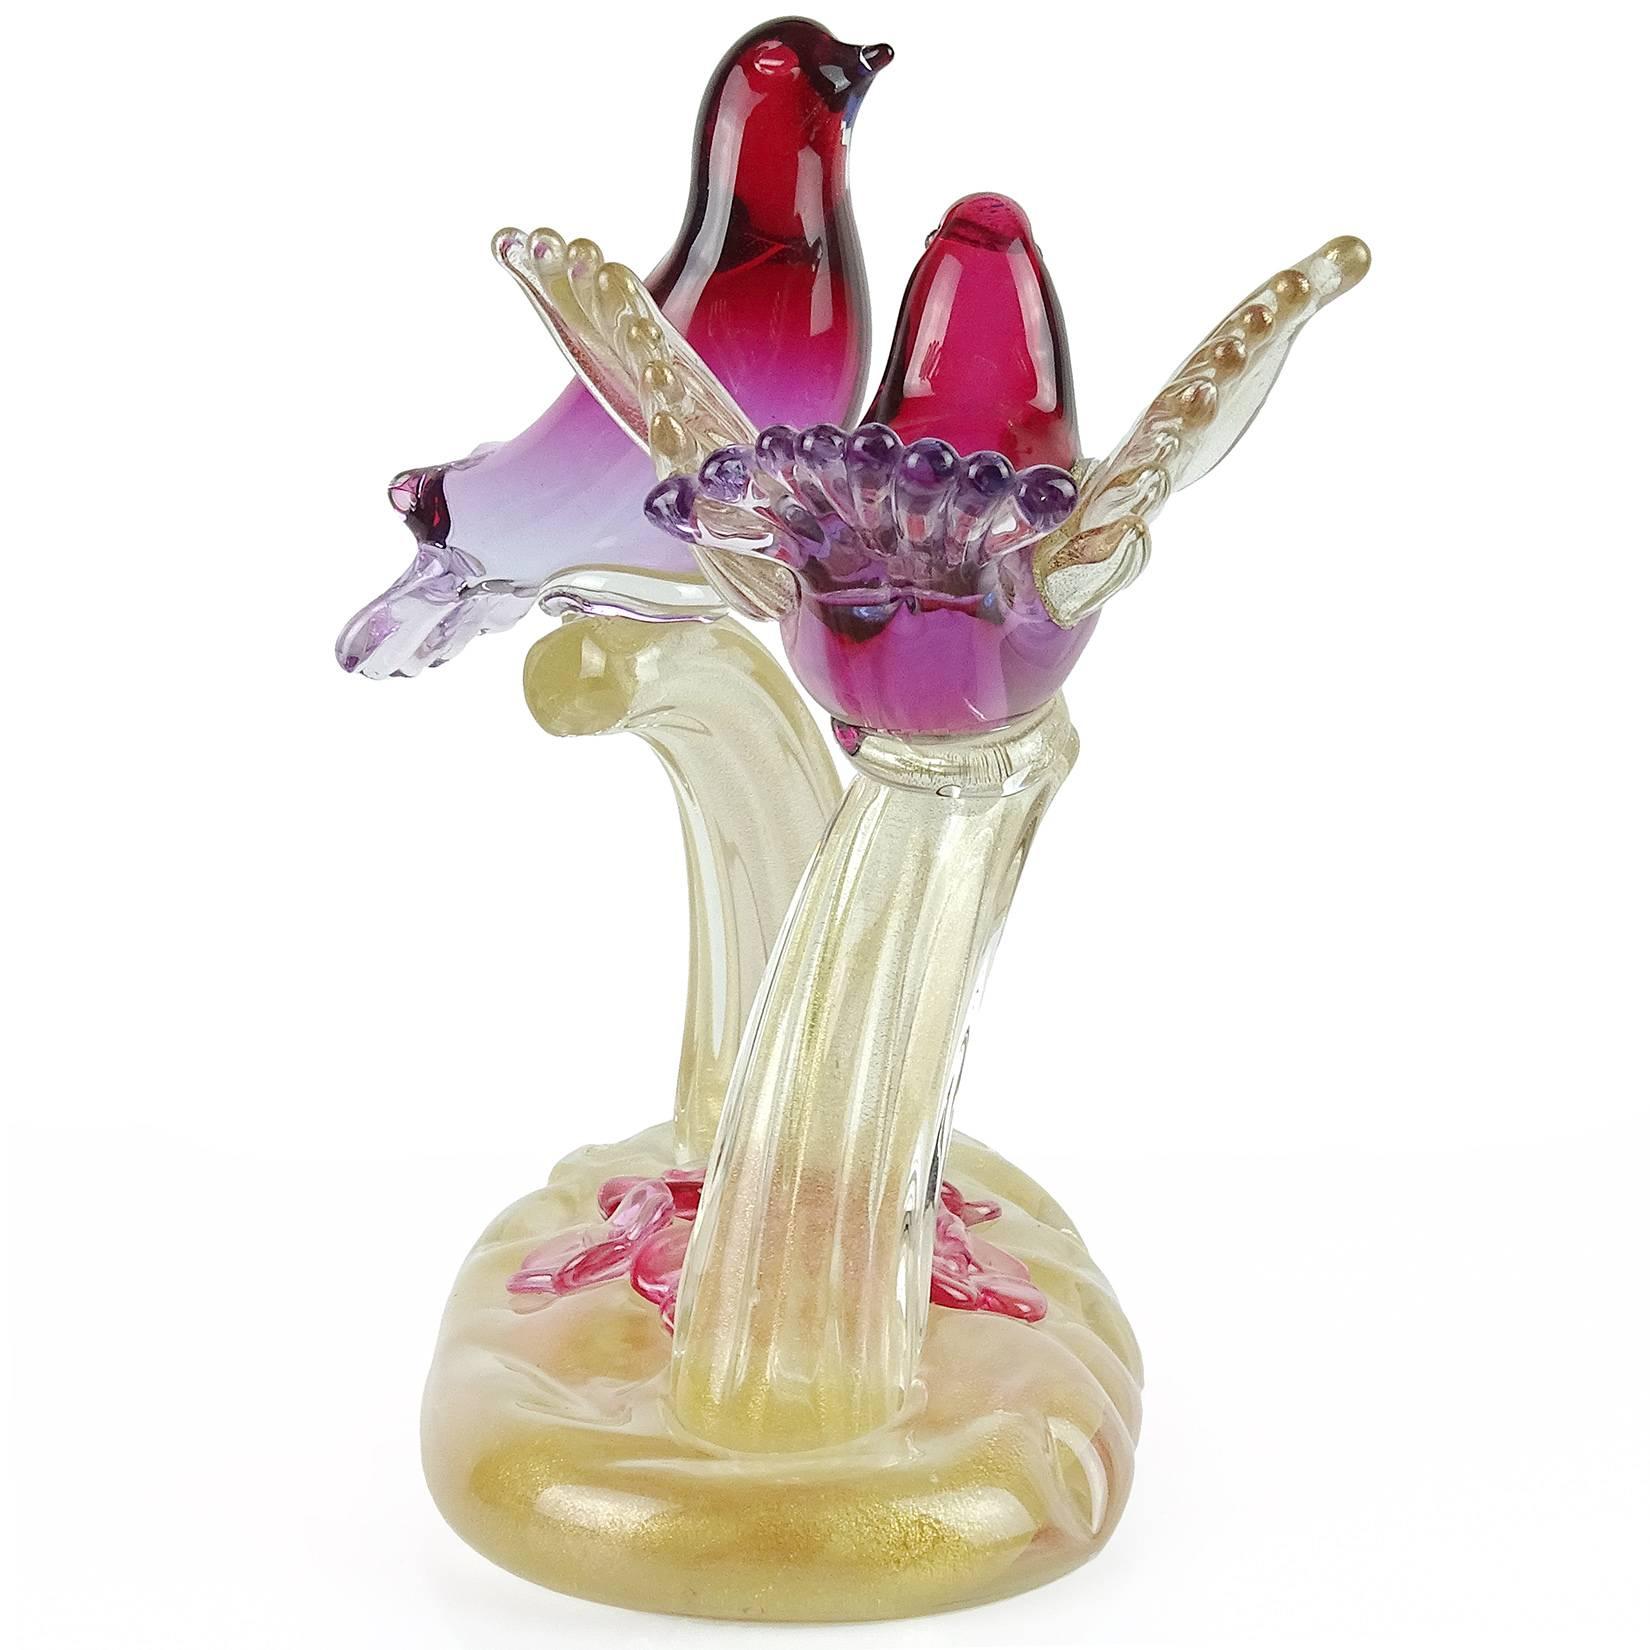 Gorgeous Murano hand blown Sommerso cranberry red to purple and gold flecks art glass courting birds sculpture. Documented to designer Alfredo Barbini. The piece is profusely covered in gold leaf, with 6 flowers on the base. Measures 7 1/4” tall x 6